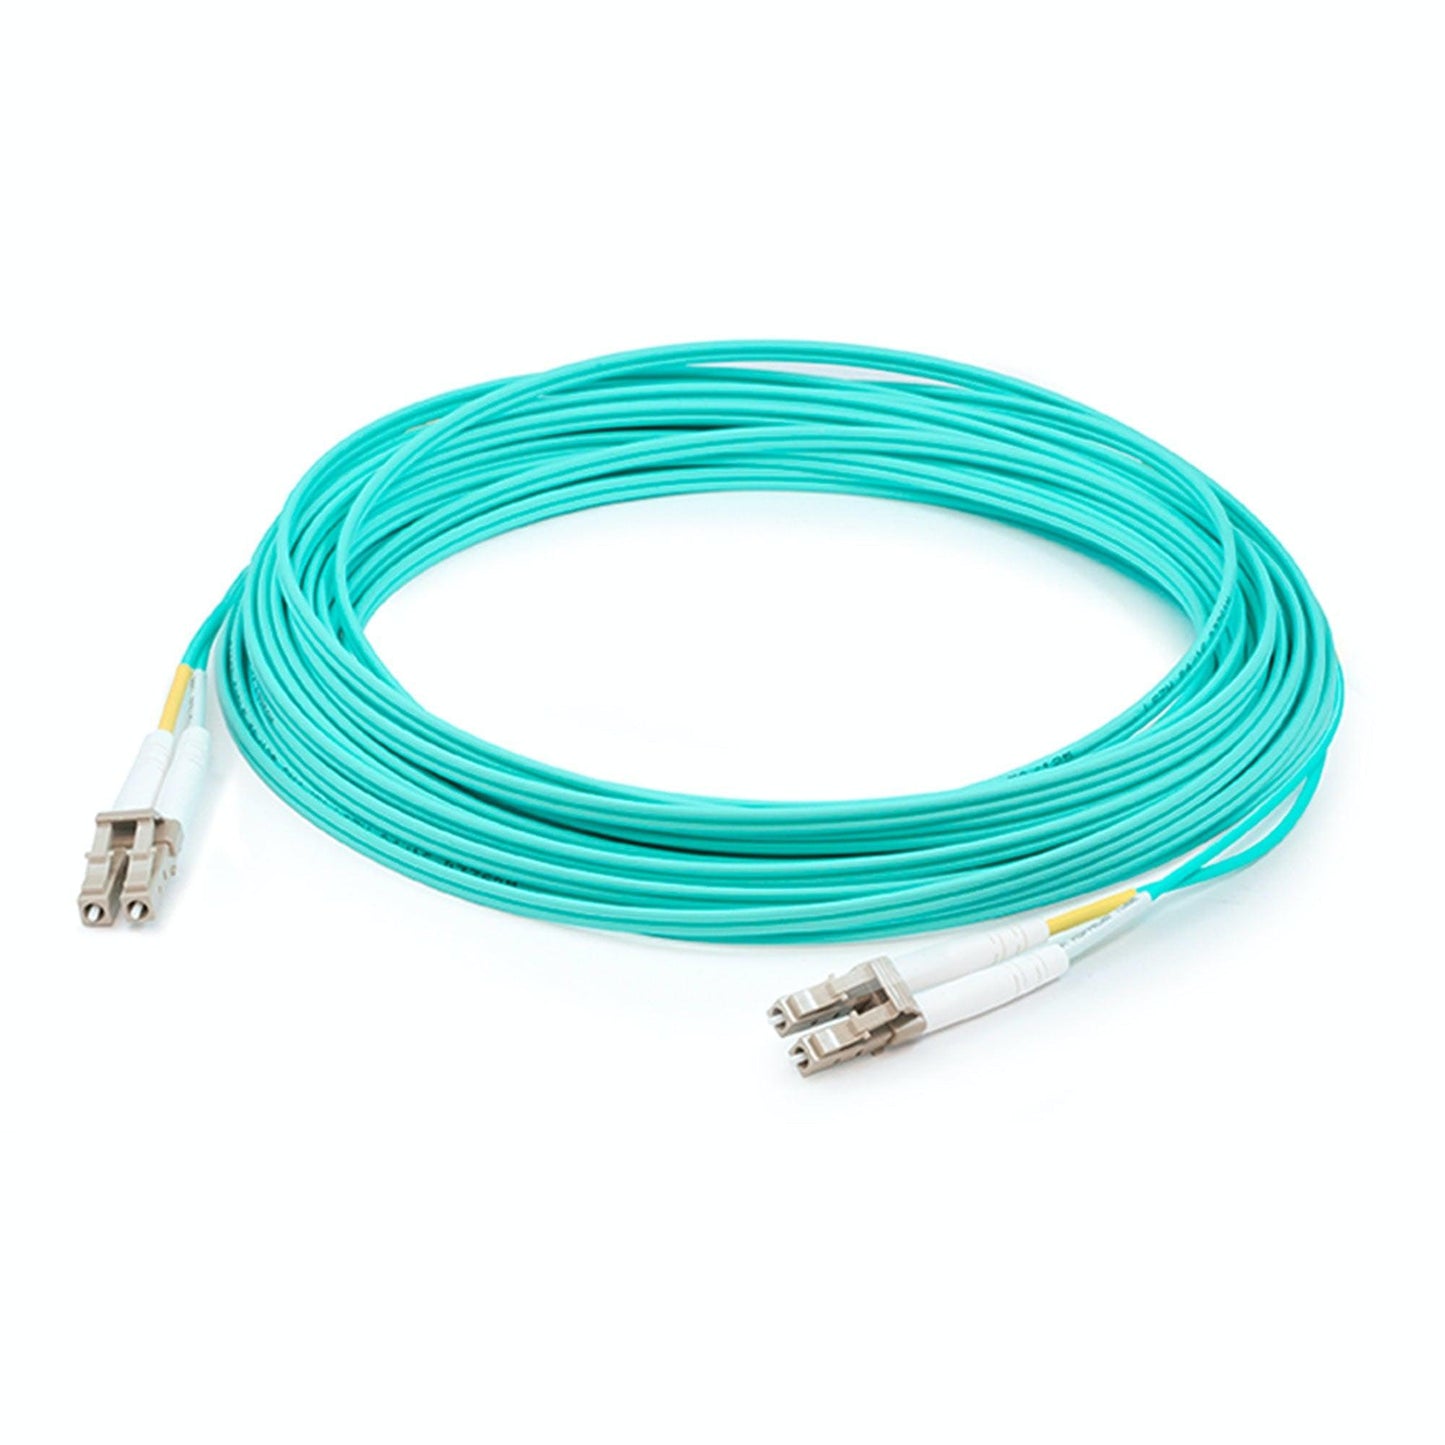 Addon Networks Add-Lc-Lc-28M5Om4 Fibre Optic Cable 28 M Ofnr Om4 Turquoise